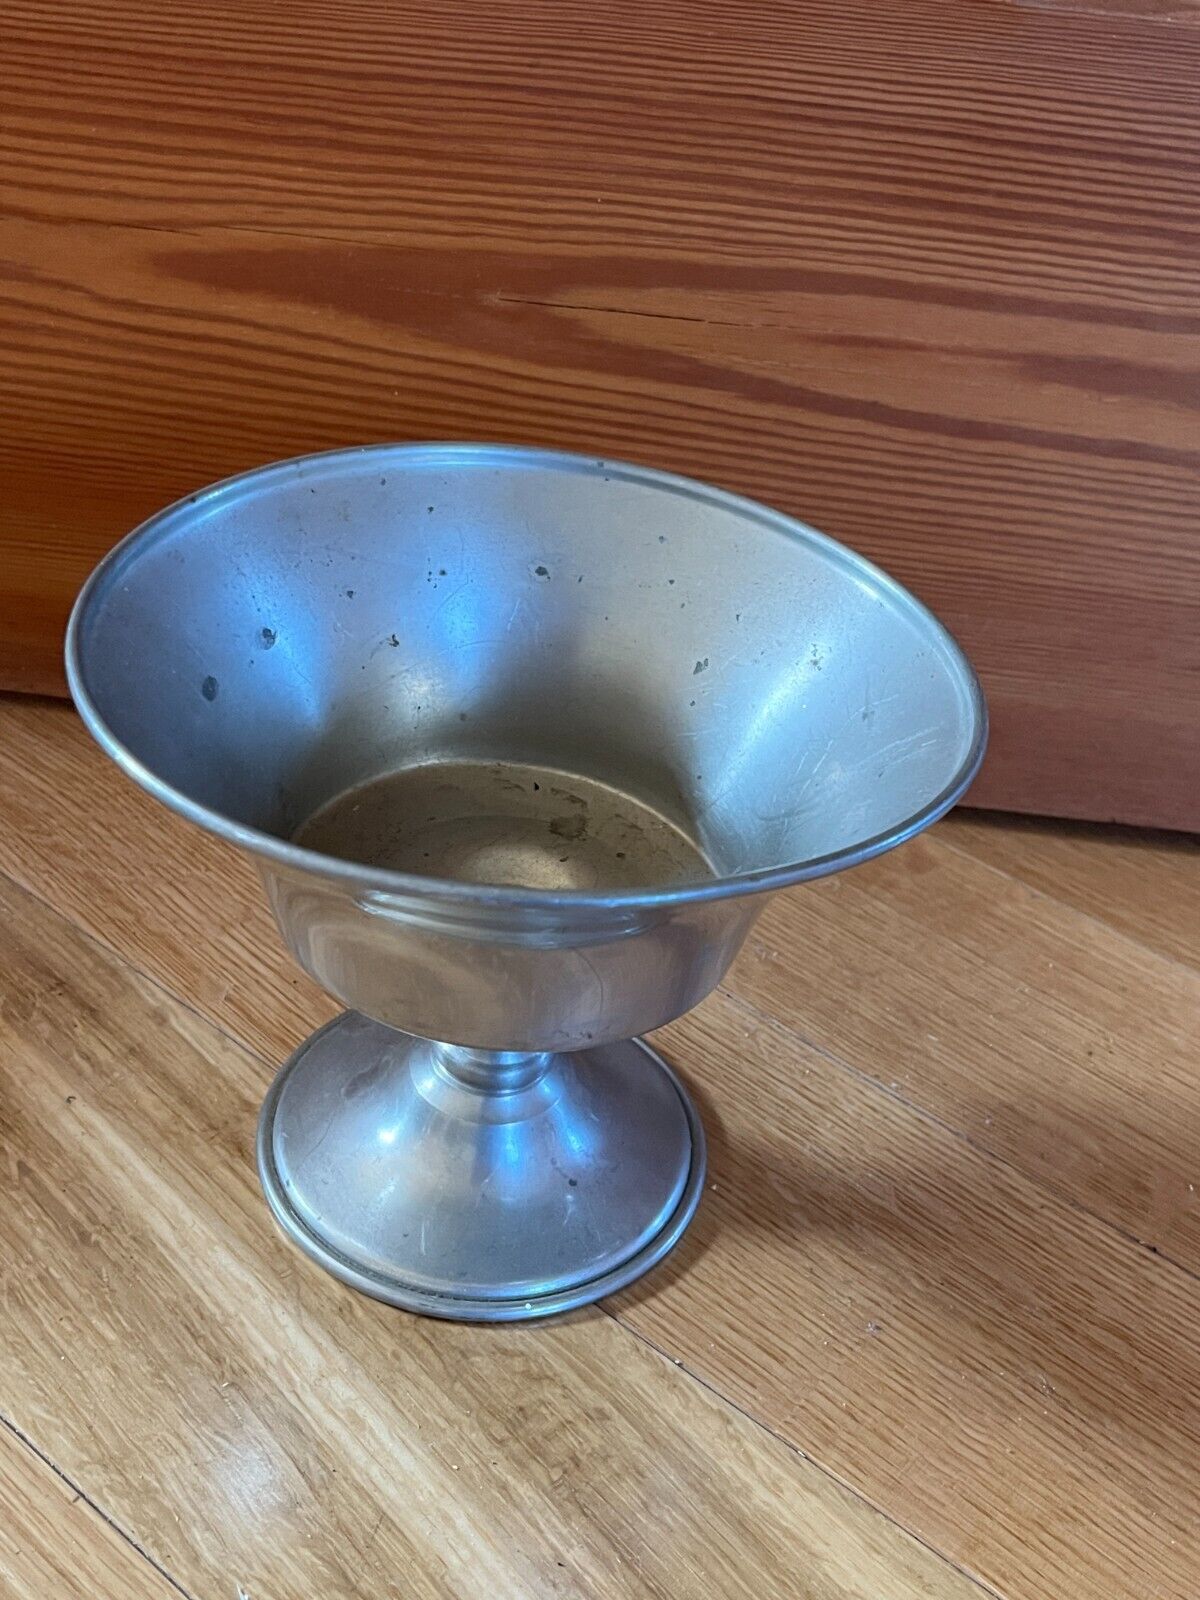 Vintage Woodbury Pewter Marked Footed Round Fruit Bowl or Other Use – 5 and 7/8t